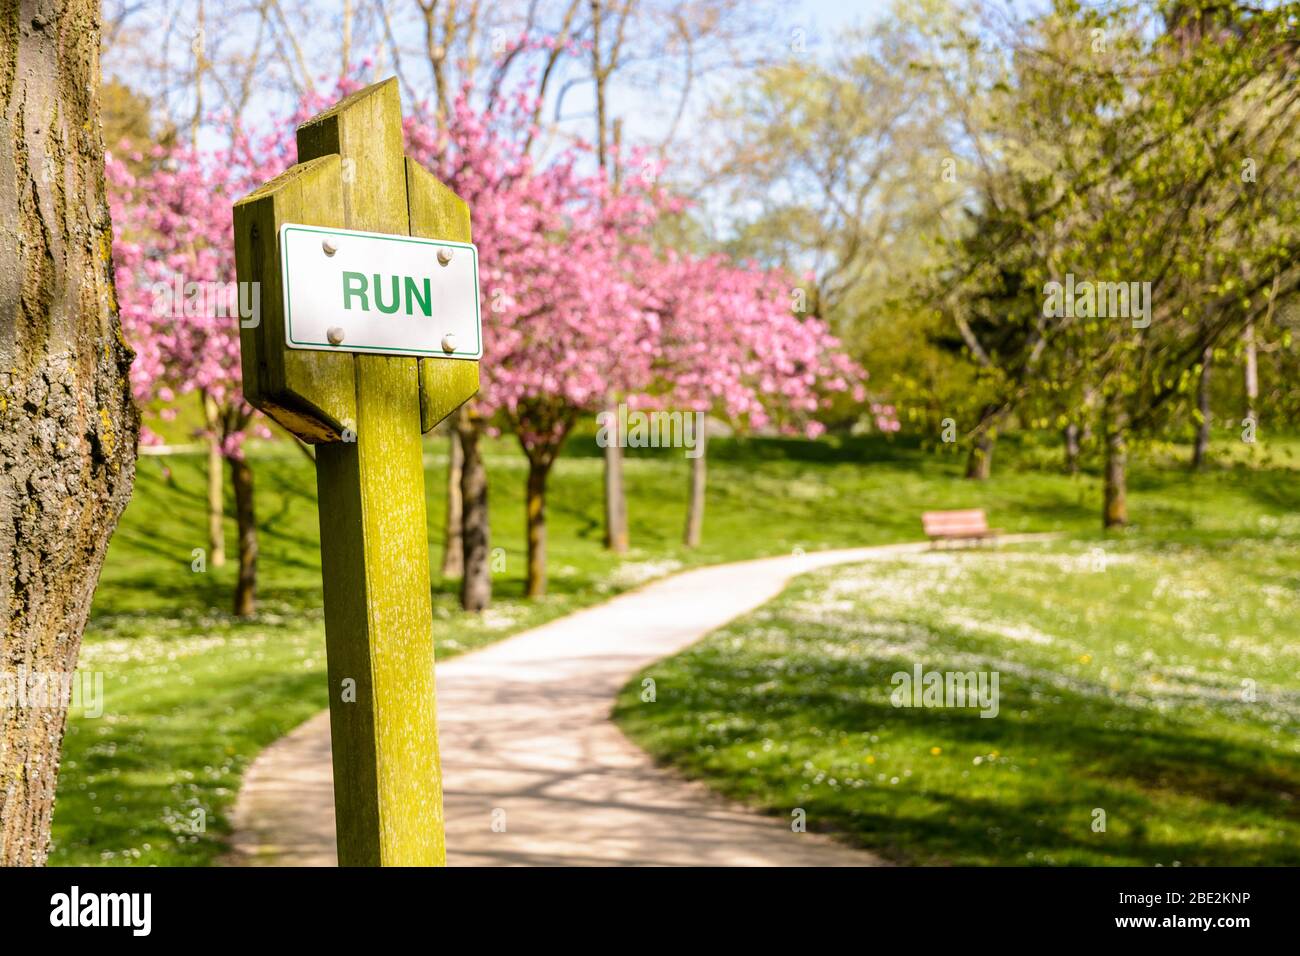 A sign on a wooden post reading 'run' on a fitness trail by a sunny spring day in a public park with blossoming cherry trees along a dirt path. Stock Photo